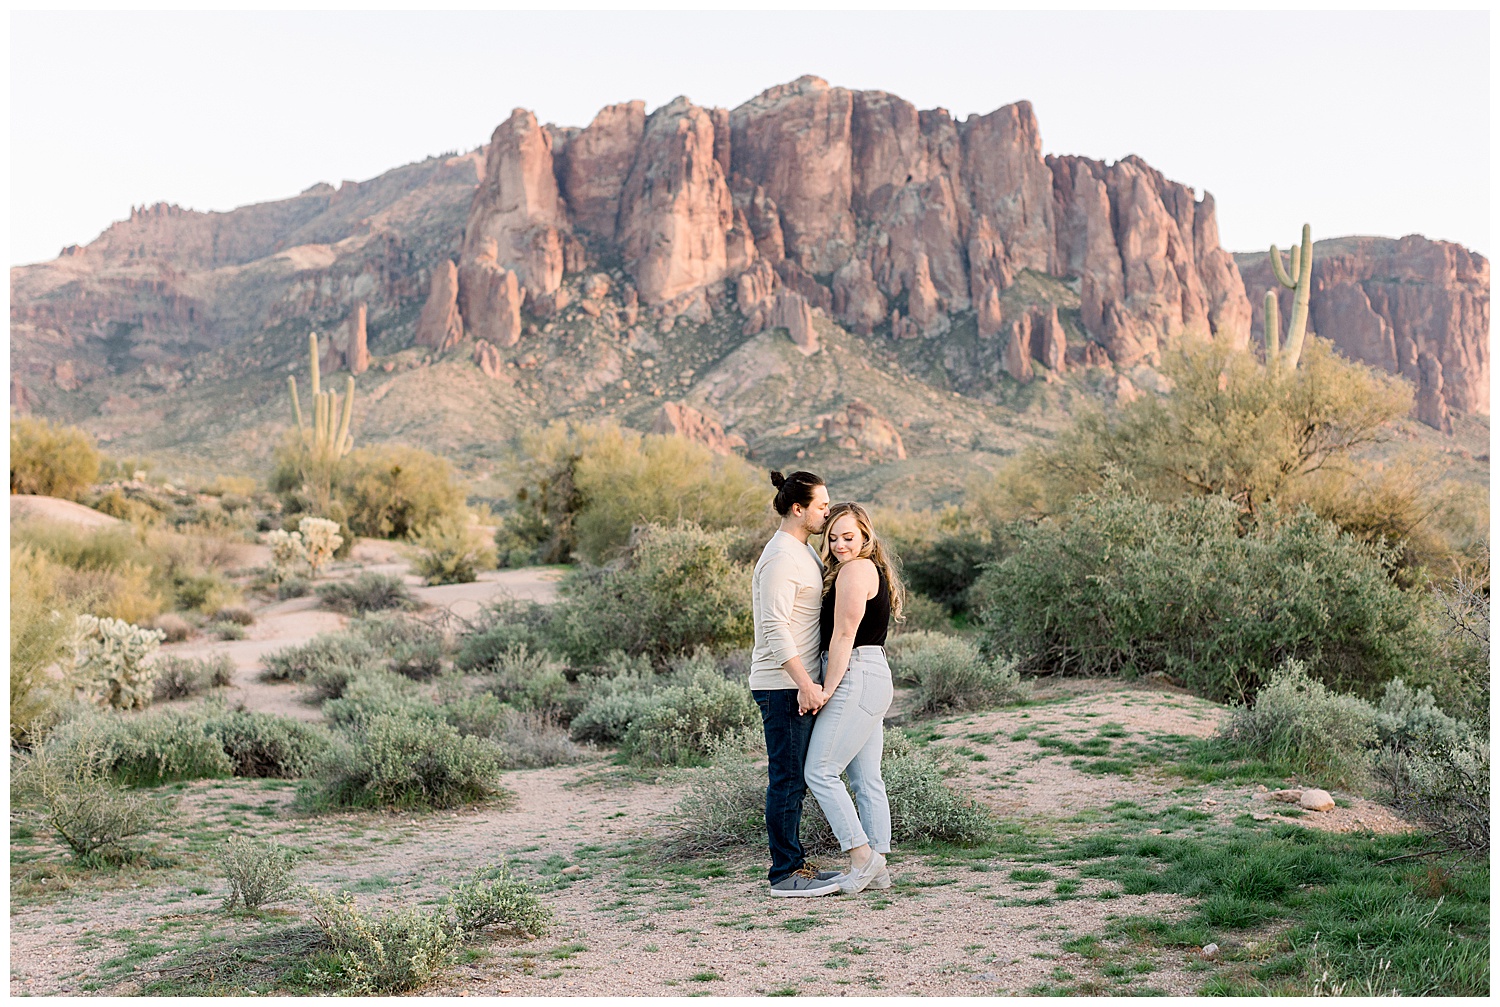 Superstition mountains in the background of an Engagement Session Photoshoot